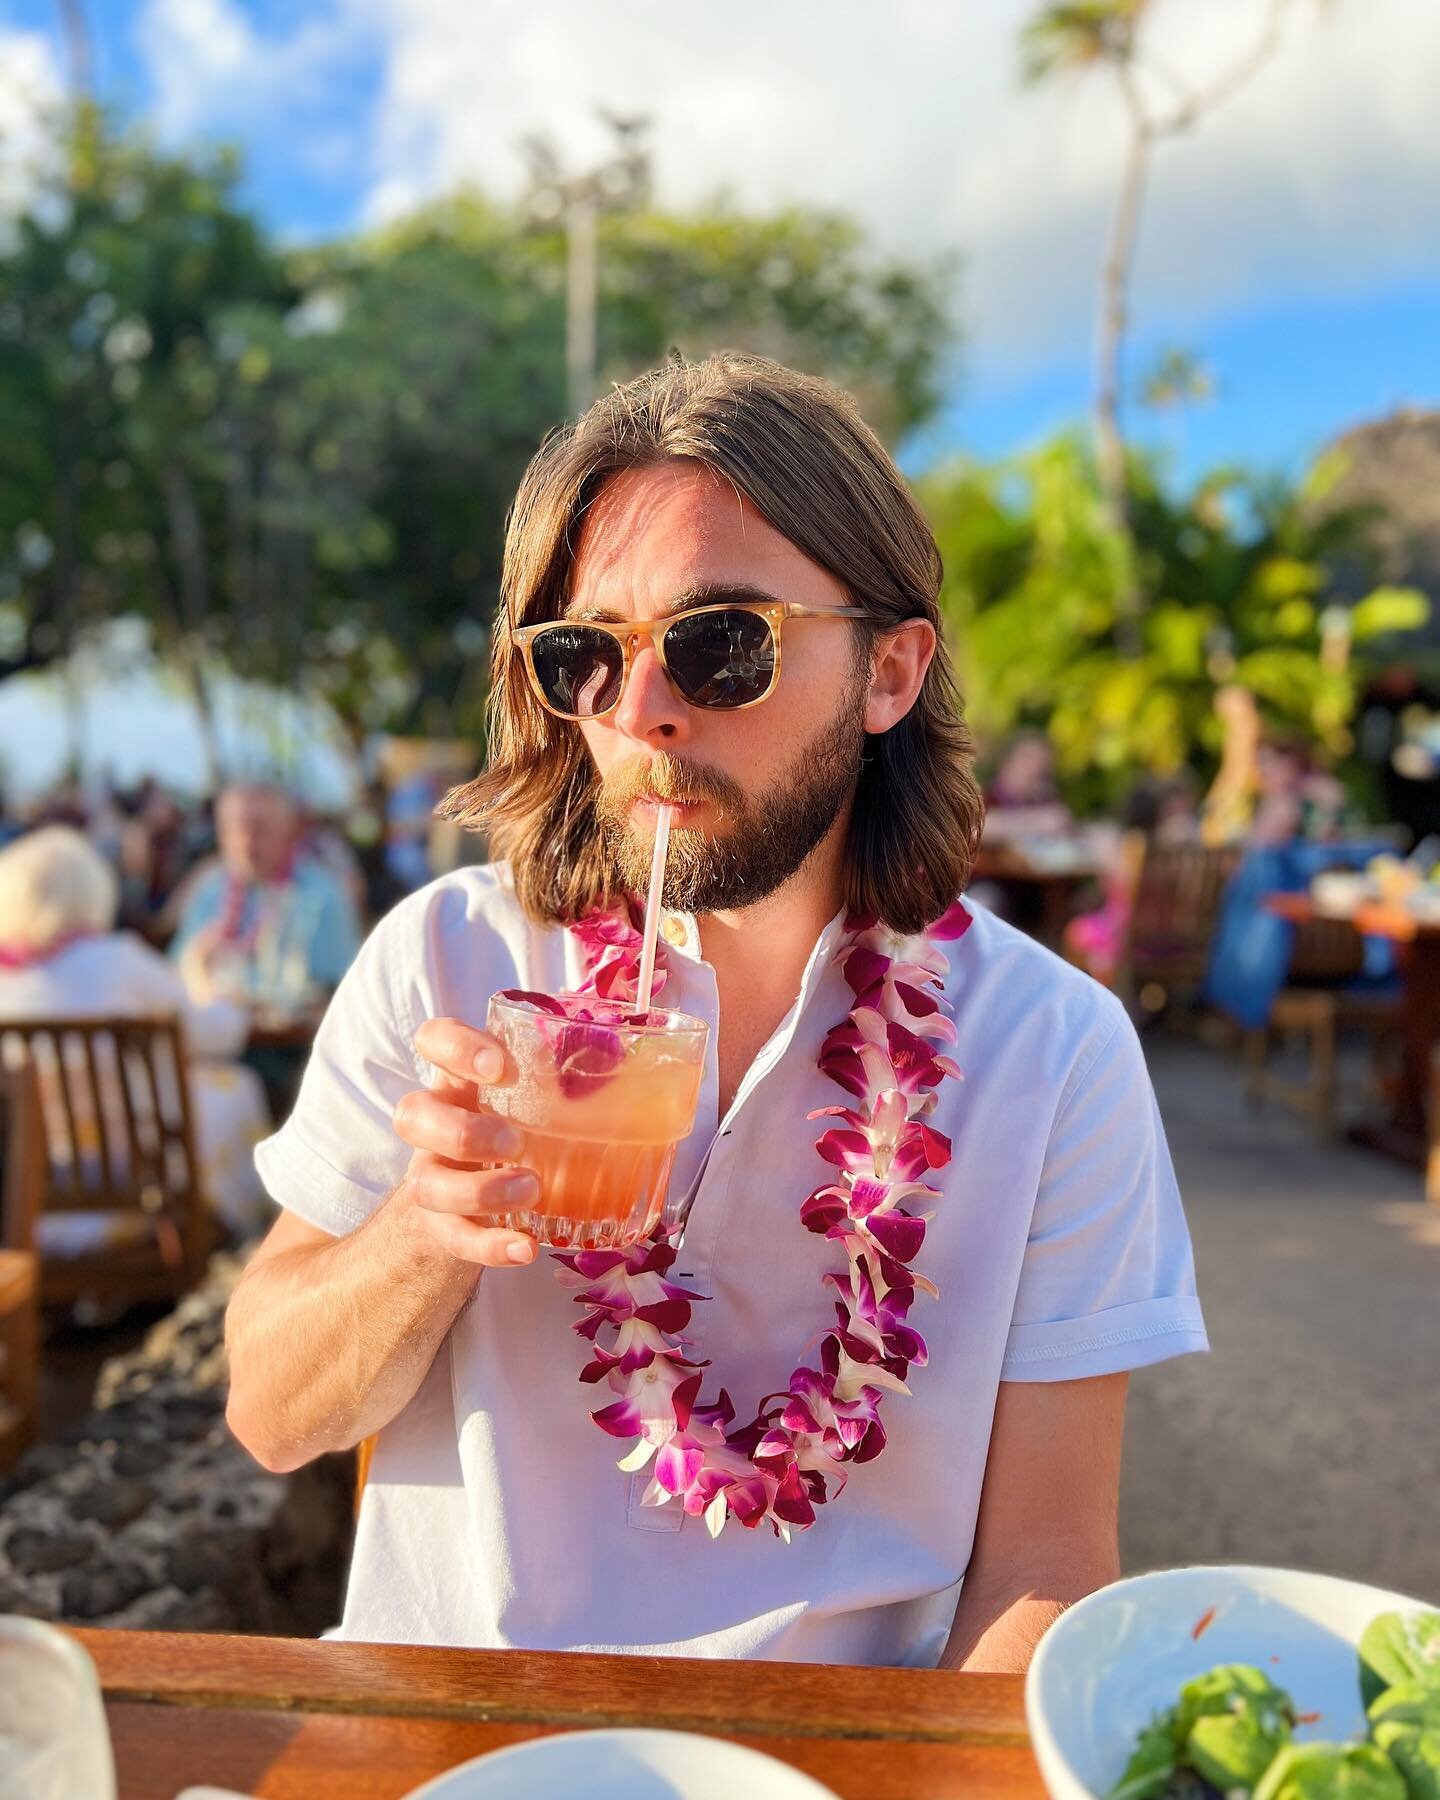 Mauiiii 🏝️😎🌺
(a few weeks late)
We celebrated a wedding, drove the Road to Hanna, hiked, ate poke and sushi for every meal, swam with the turtles and picked up sea urchins, saw the whales, and generally just had a great time.